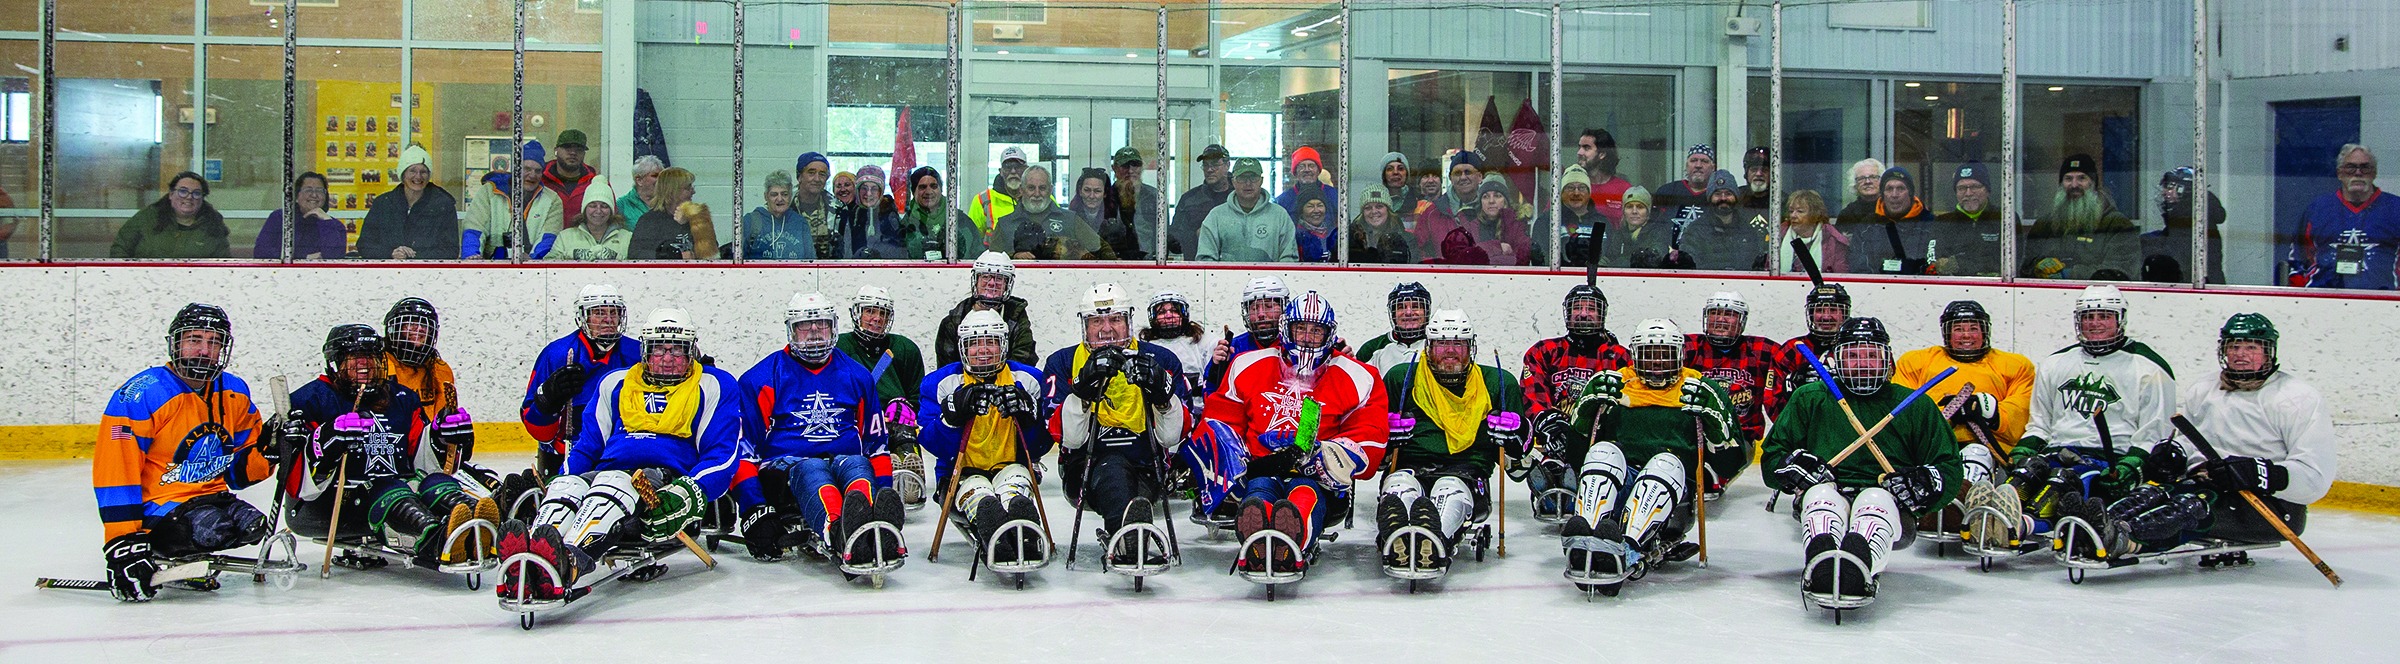 Sled hockey is a popular event at the winter sports clinic